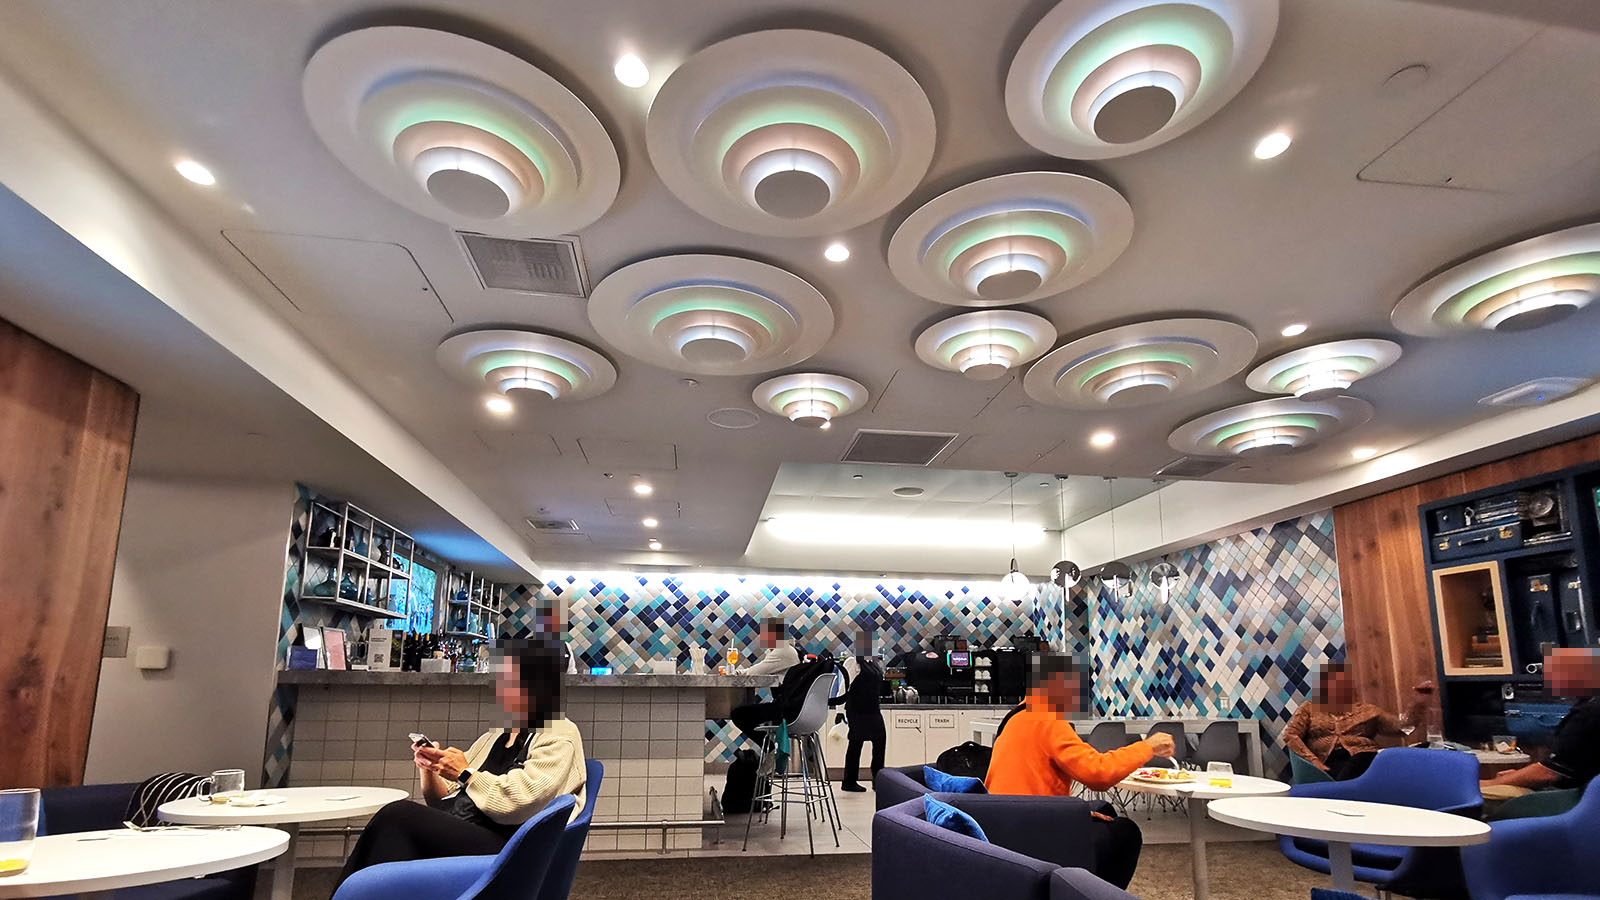 Central area of the Amex Centurion Lounge in Los Angeles